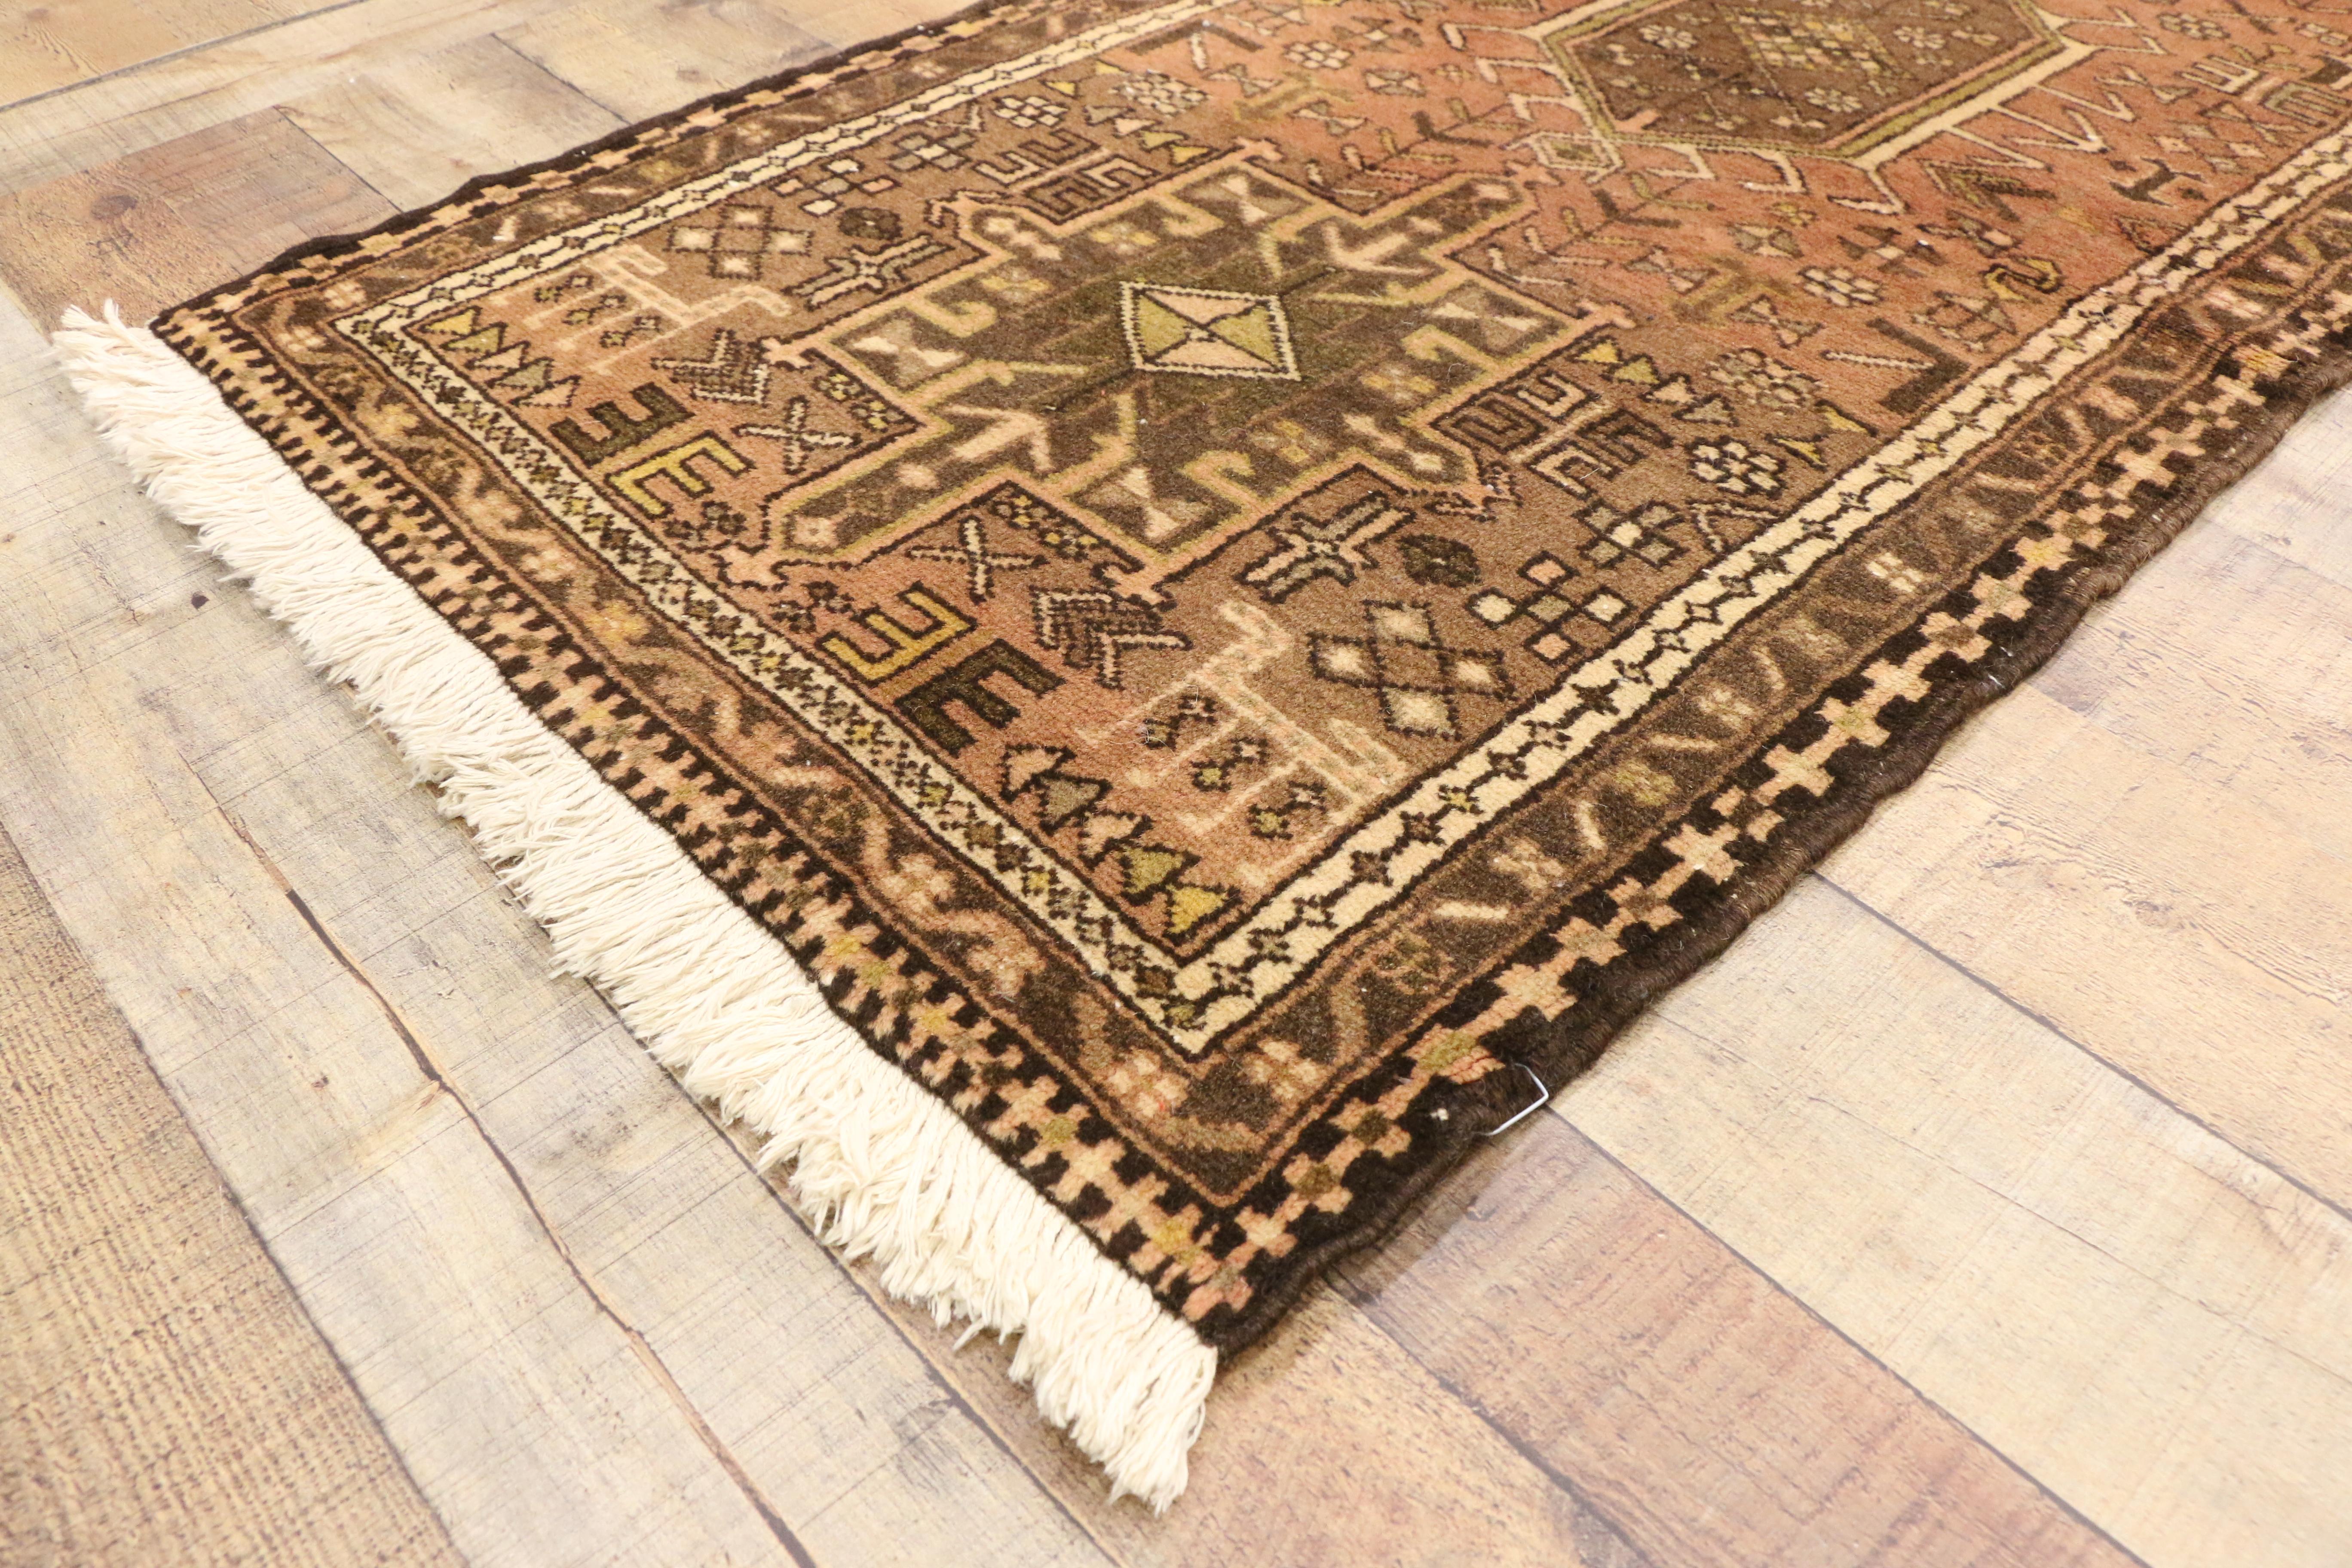 73679, Spanish Revival Style Vintage Persian Heriz Runner, Narrow Hallway Runner. This hand-knotted wool vintage Persian Heriz runner features a series of square and hooked amulet medallions surrounded by an array of tribal motifs. Earthy hues of